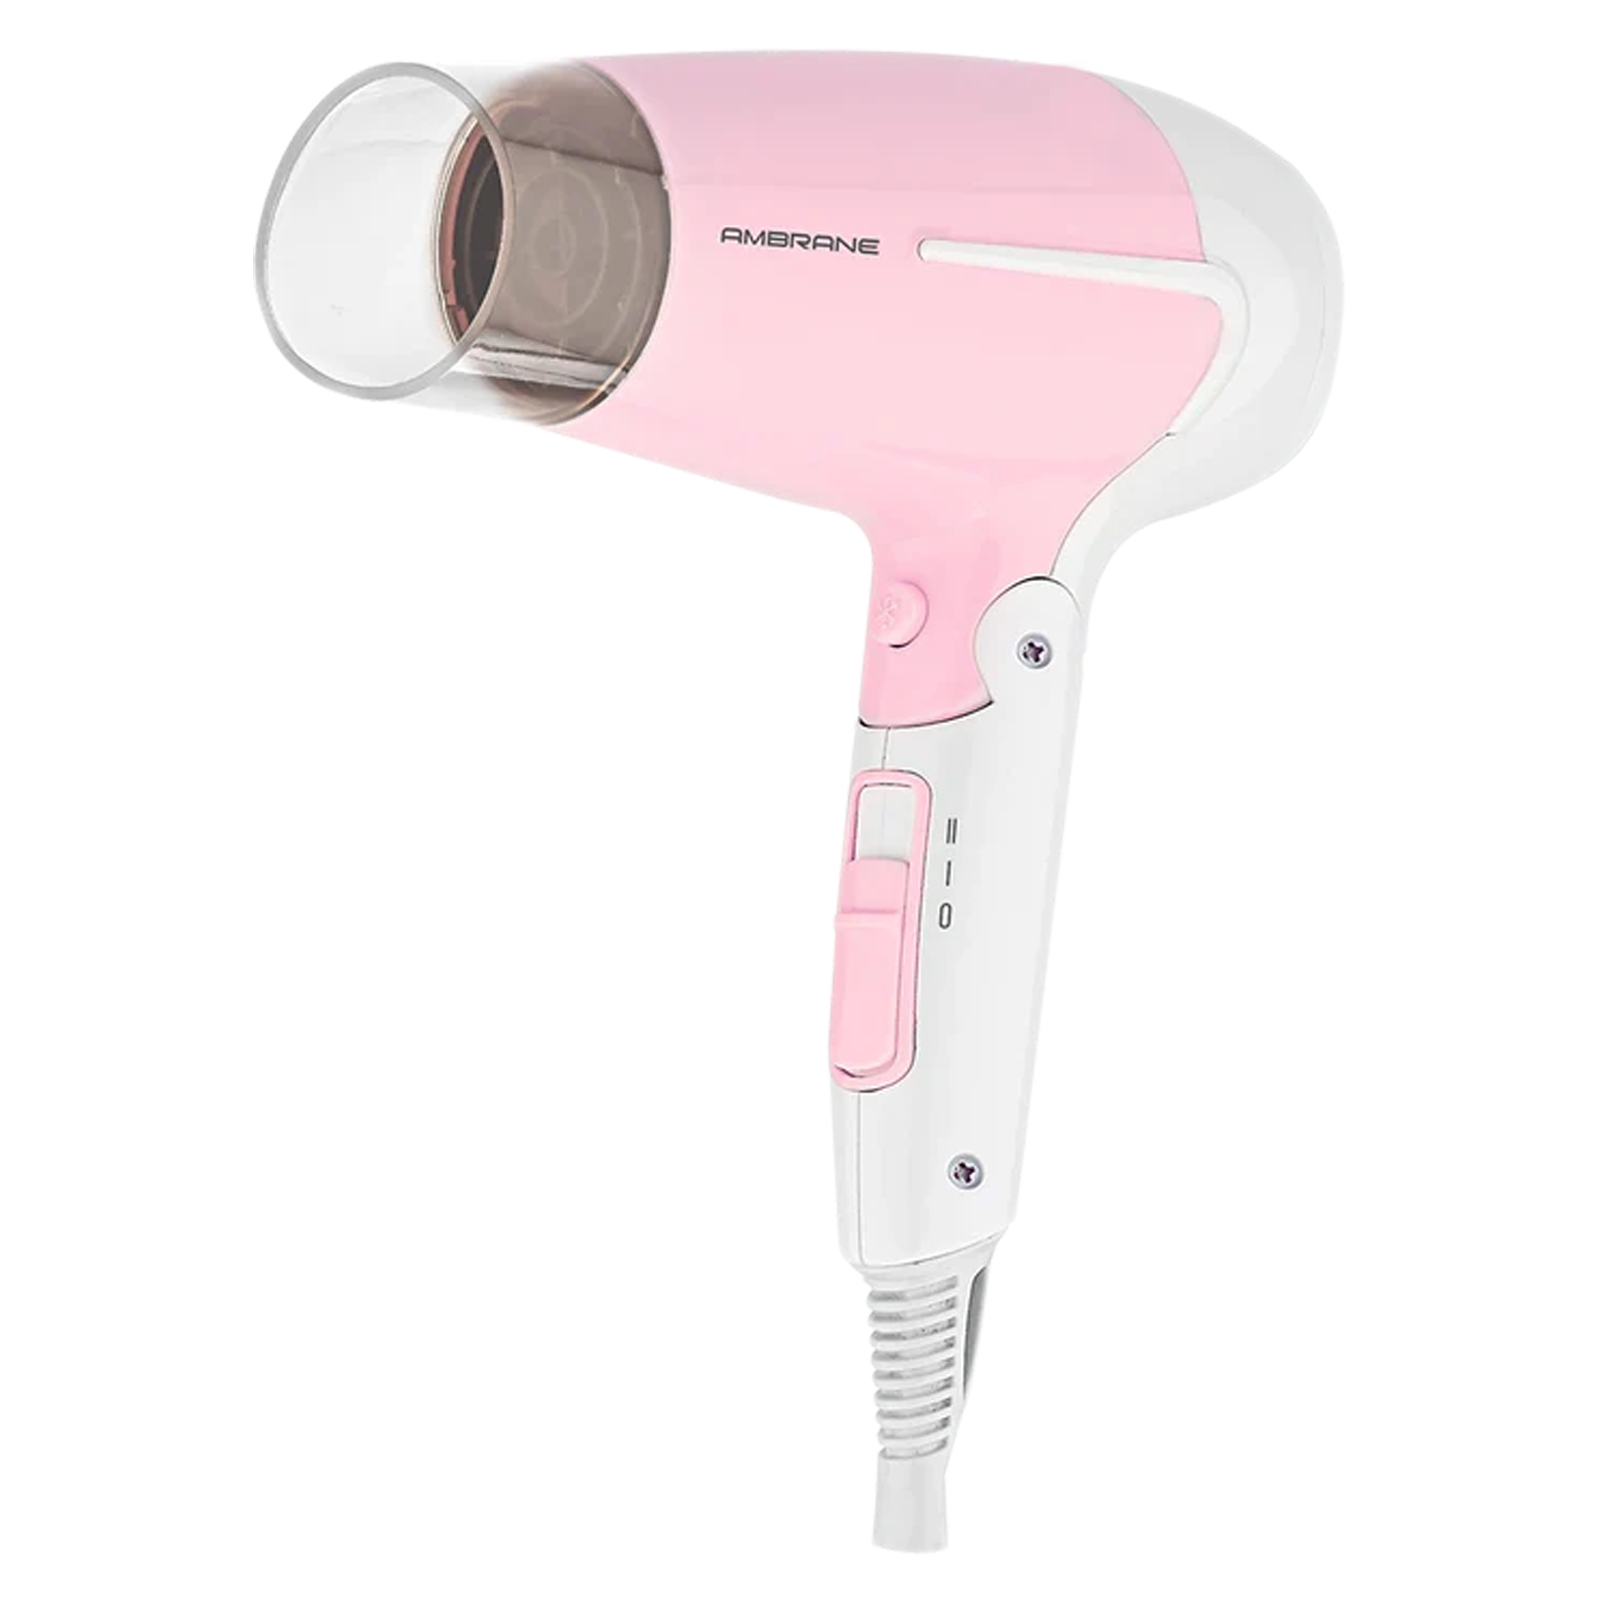 Philips Hair Dryer BHD30830 1600w Thermoprotect Airflower 3 Heat  Speed  Settings For Quick Drying Buy Philips Hair Dryer BHD30830 1600w  Thermoprotect Airflower 3 Heat  Speed Settings For Quick Drying Online